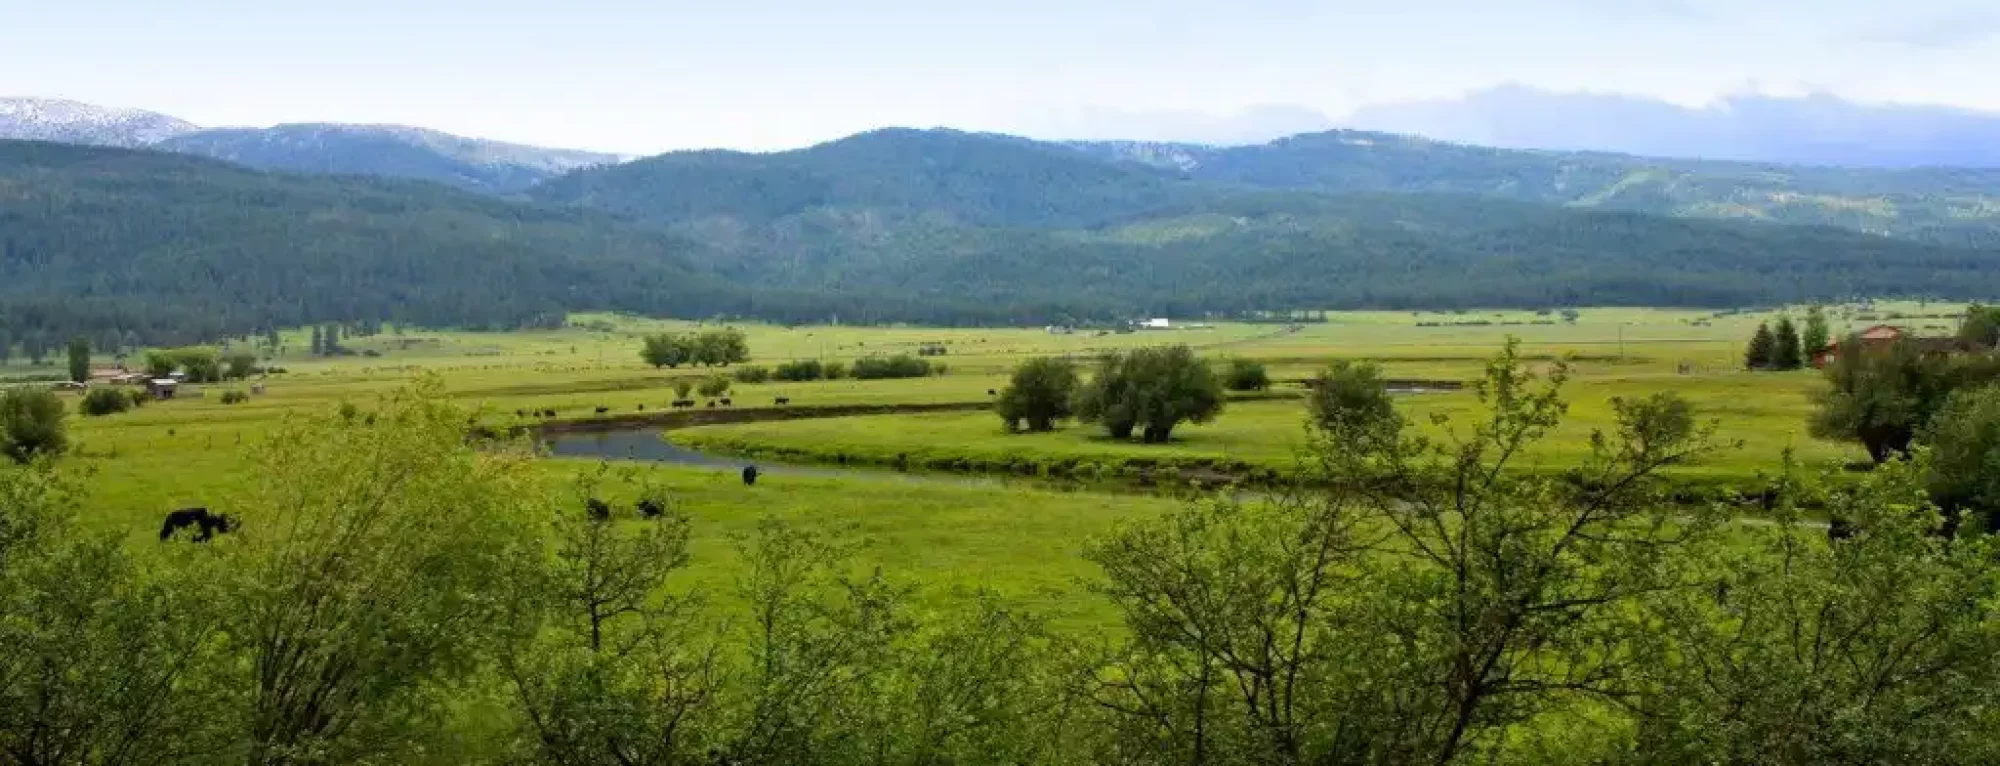 hot-springs-ranch-for-sale-new-meadows-idaho6